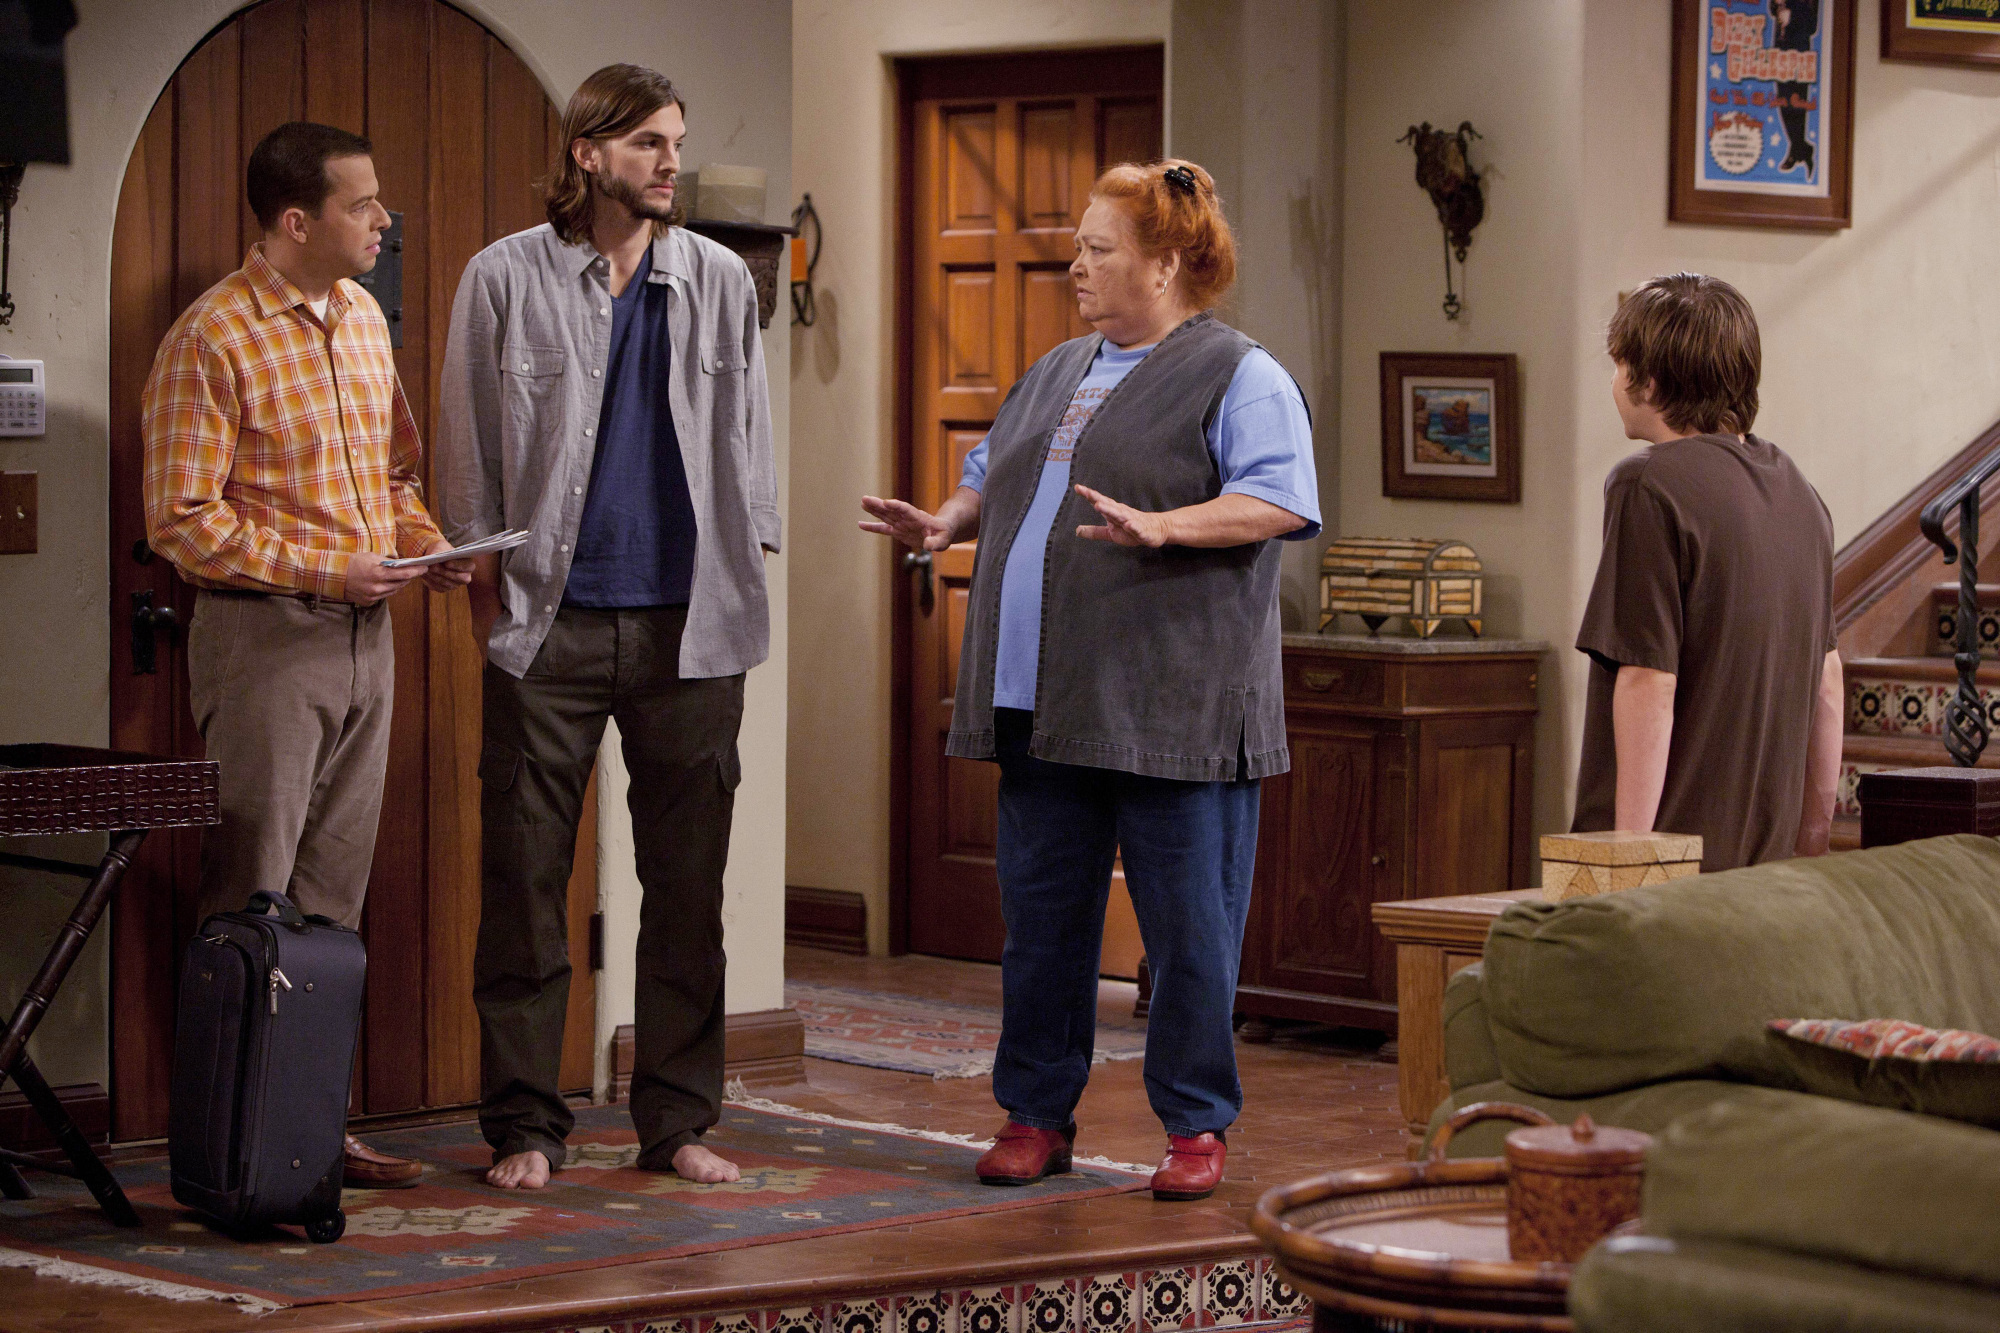 Still of Jon Cryer, Conchata Ferrell and Ashton Kutcher in Two and a Half Men (2003)